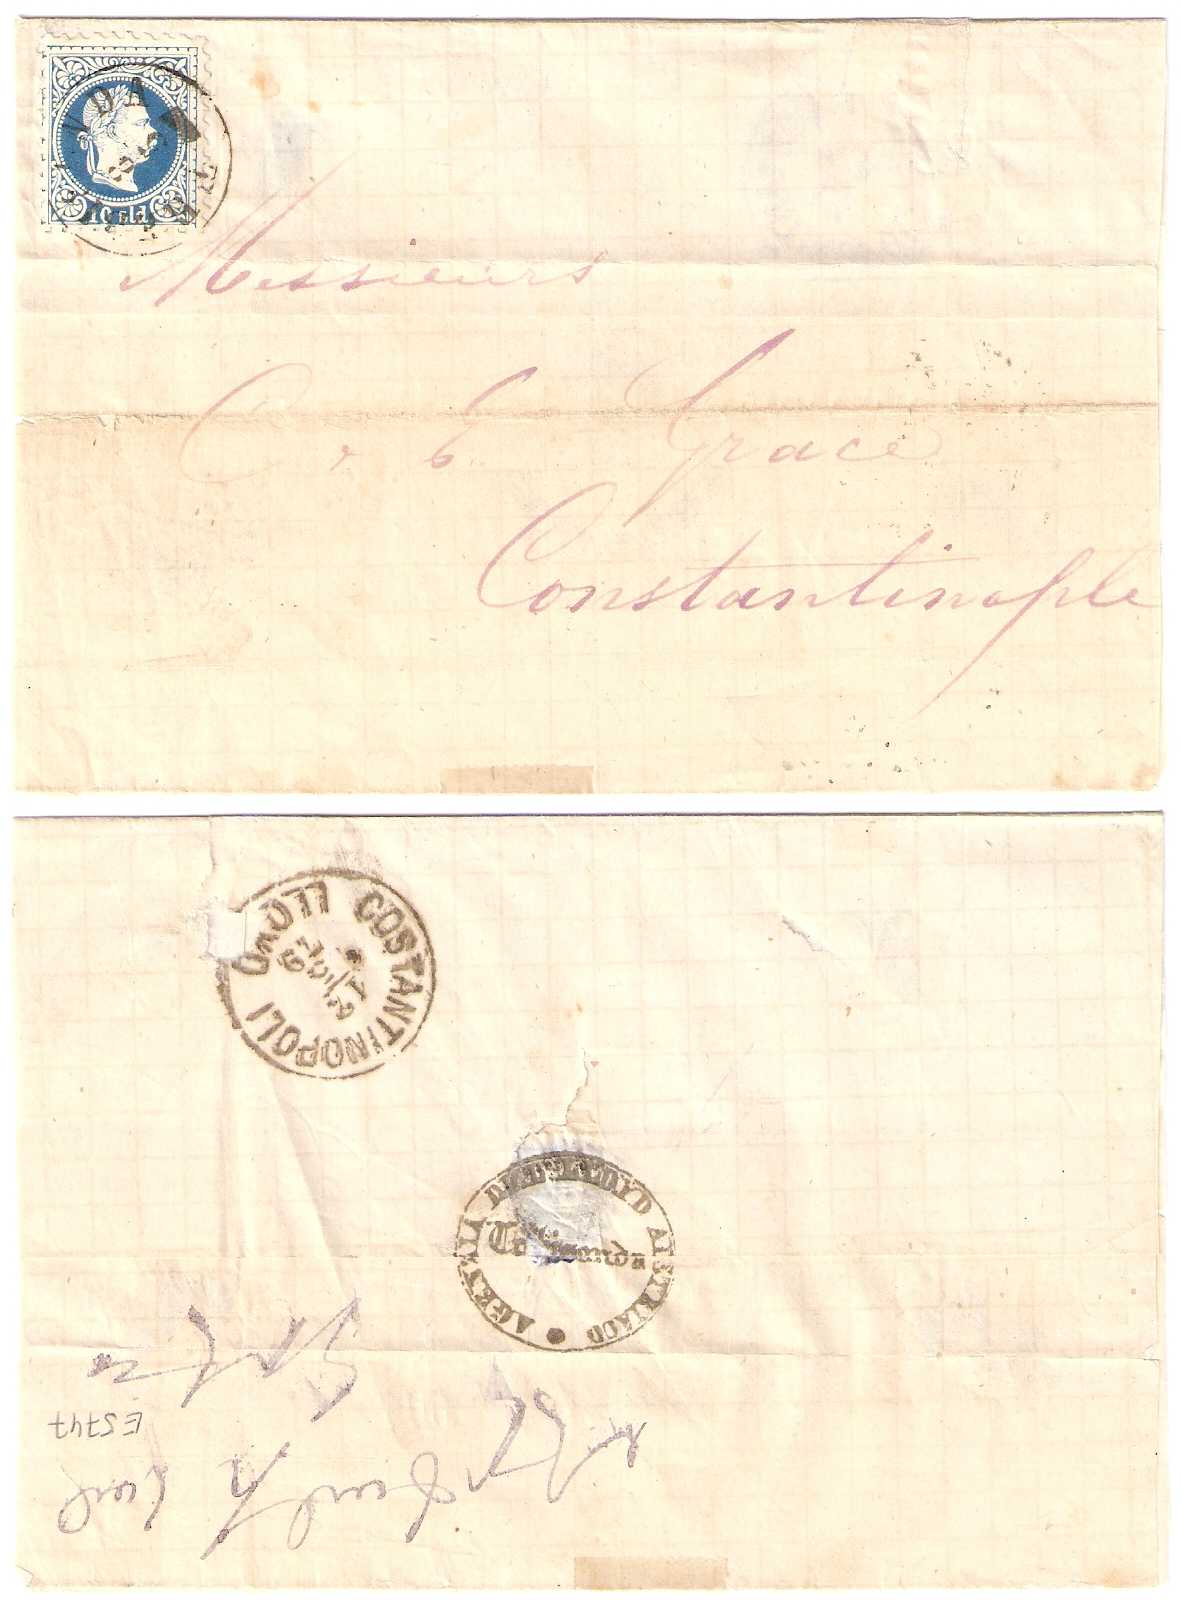 8.5.1879 Austrian Post Offices in the Ottoman Empire Smyrna 1.6.1872 Letter